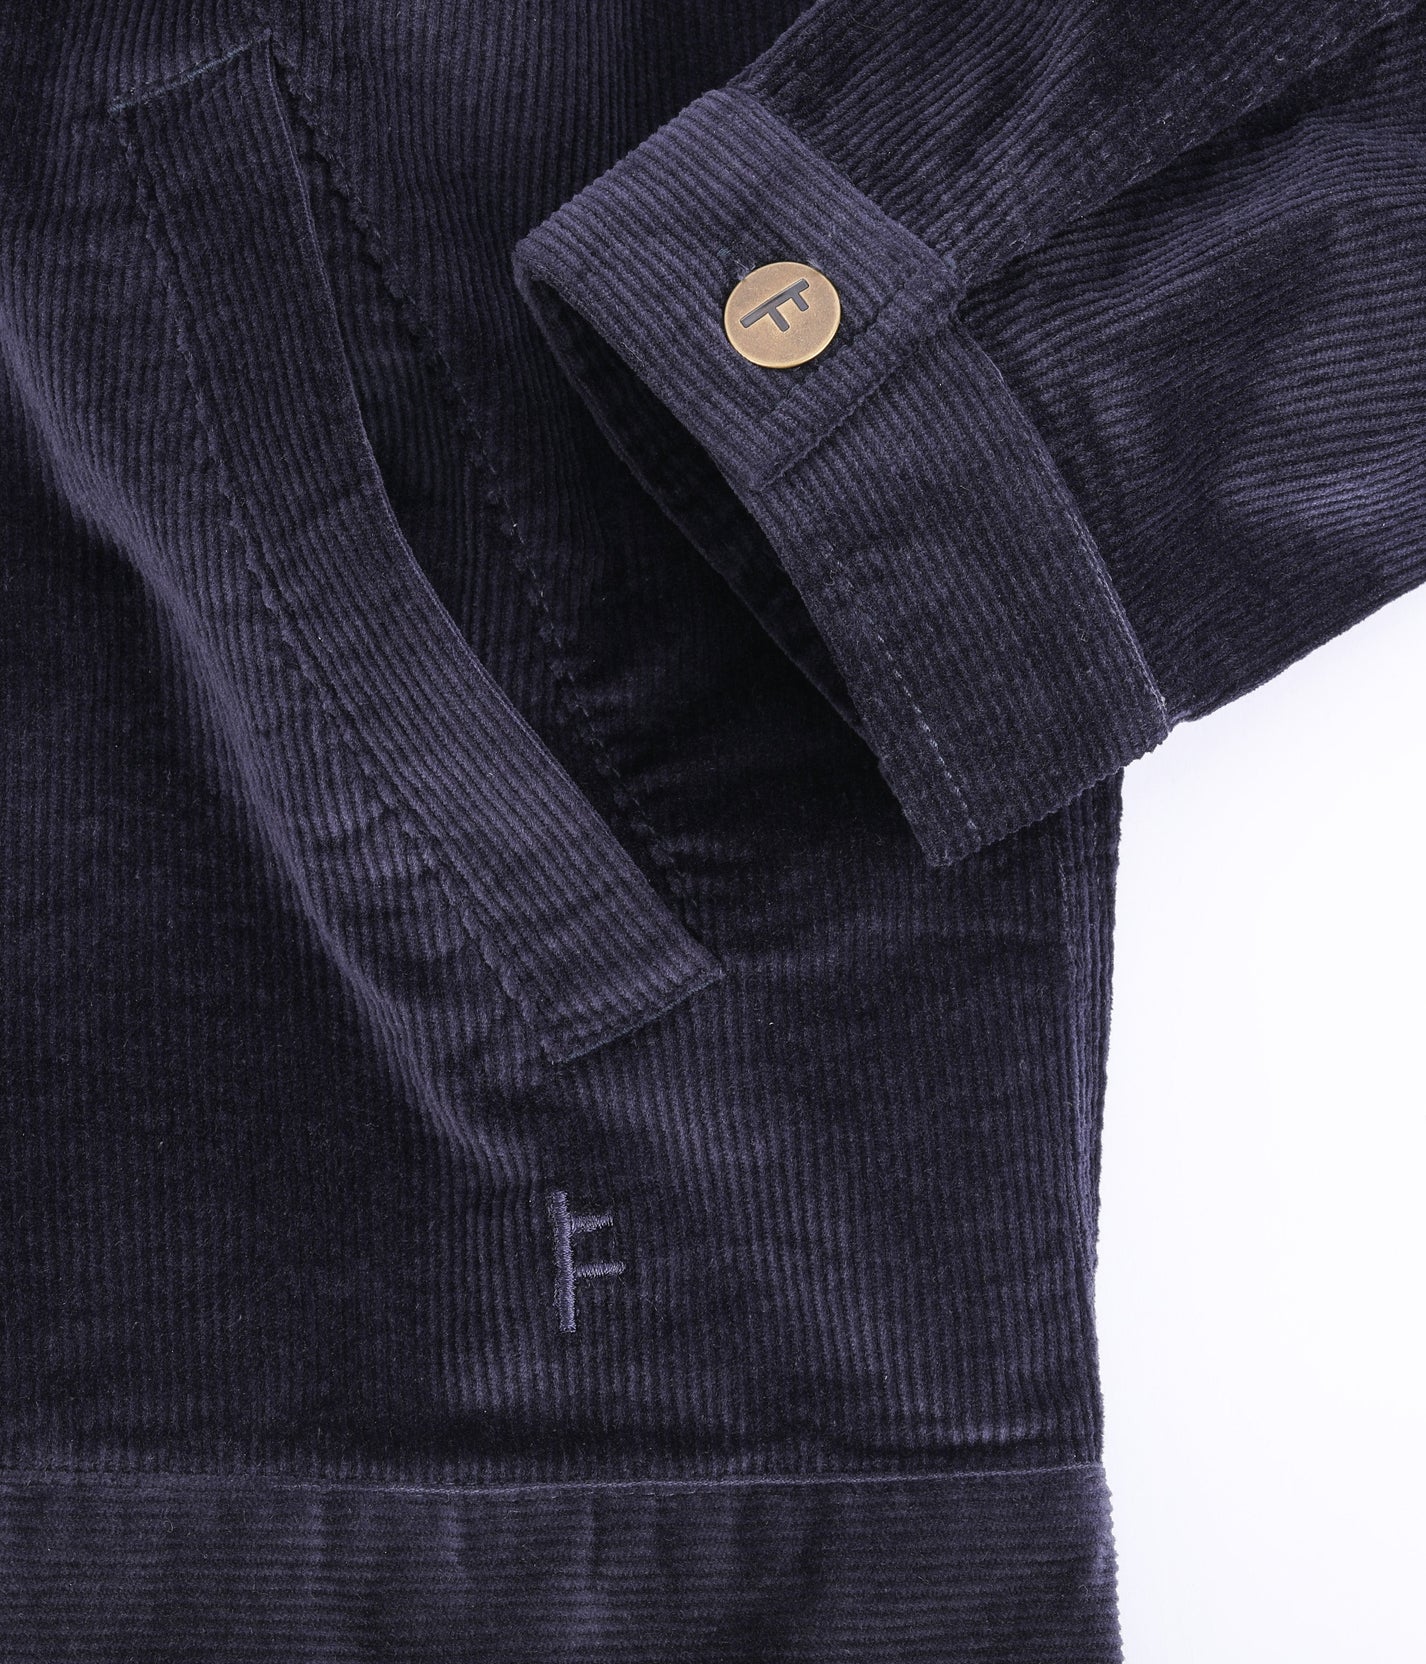 Former Distend Cord Jacket - Navy